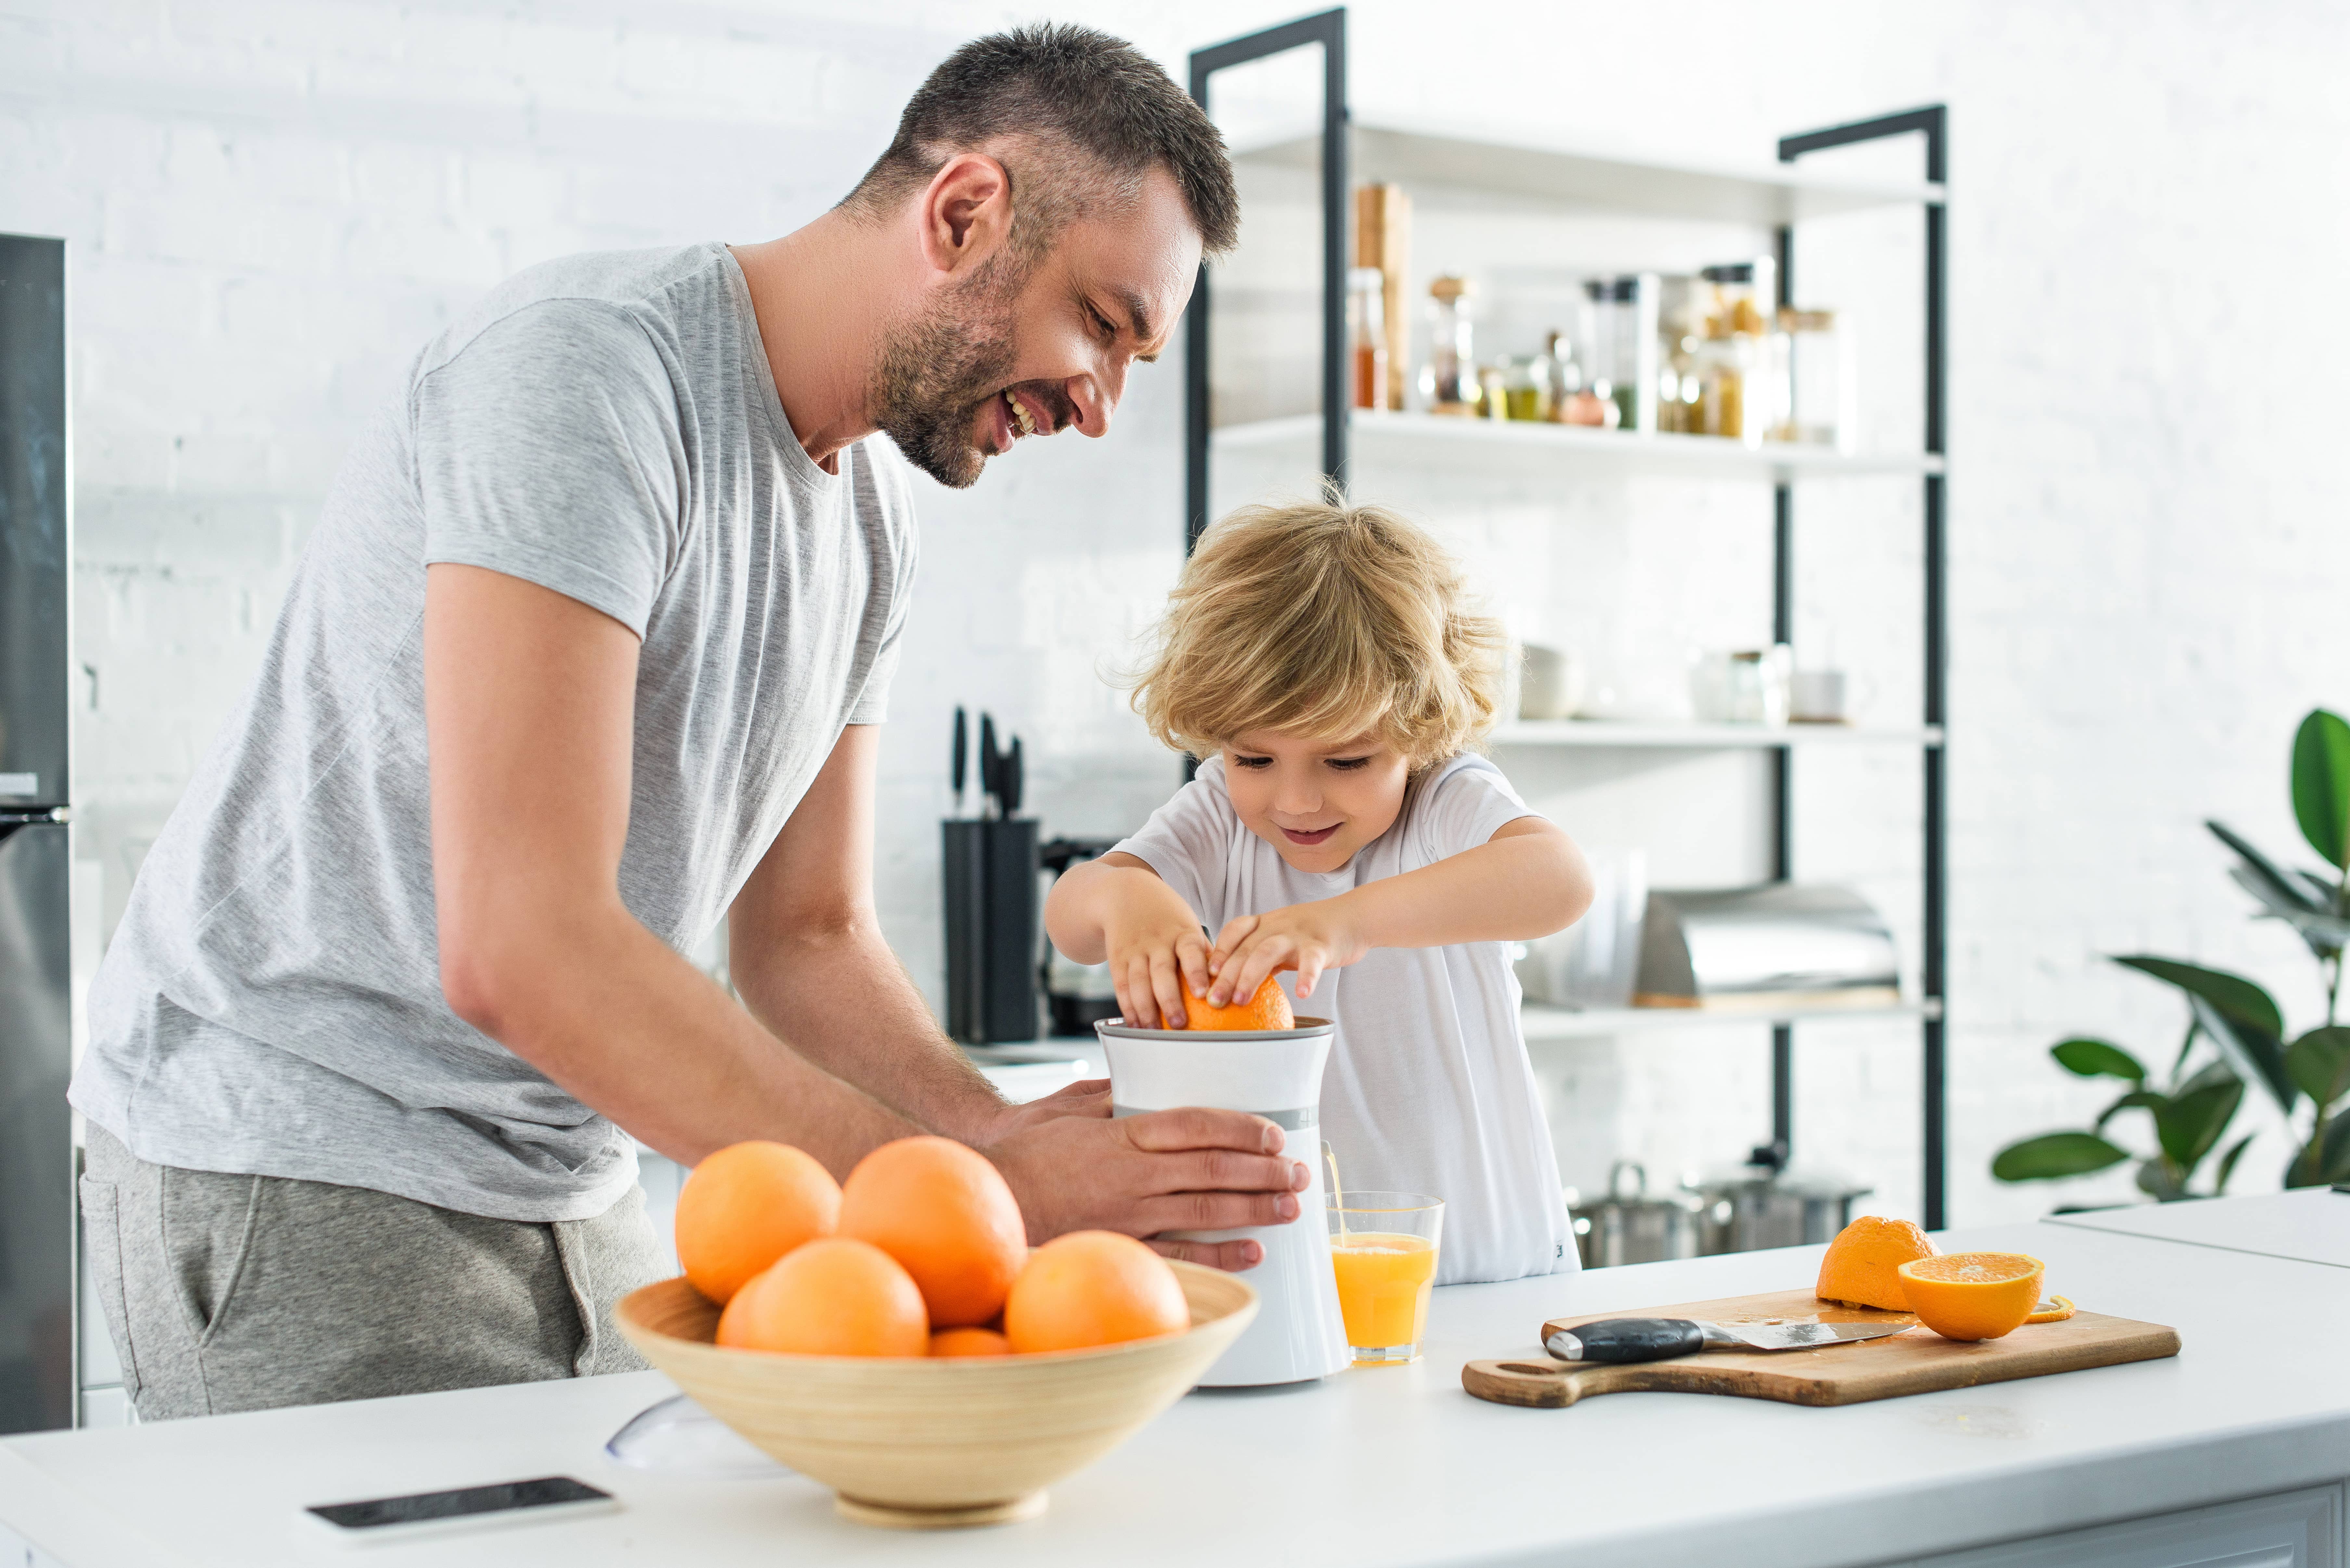 Smiling father and his preschool son juicing oranges in the kitchen.